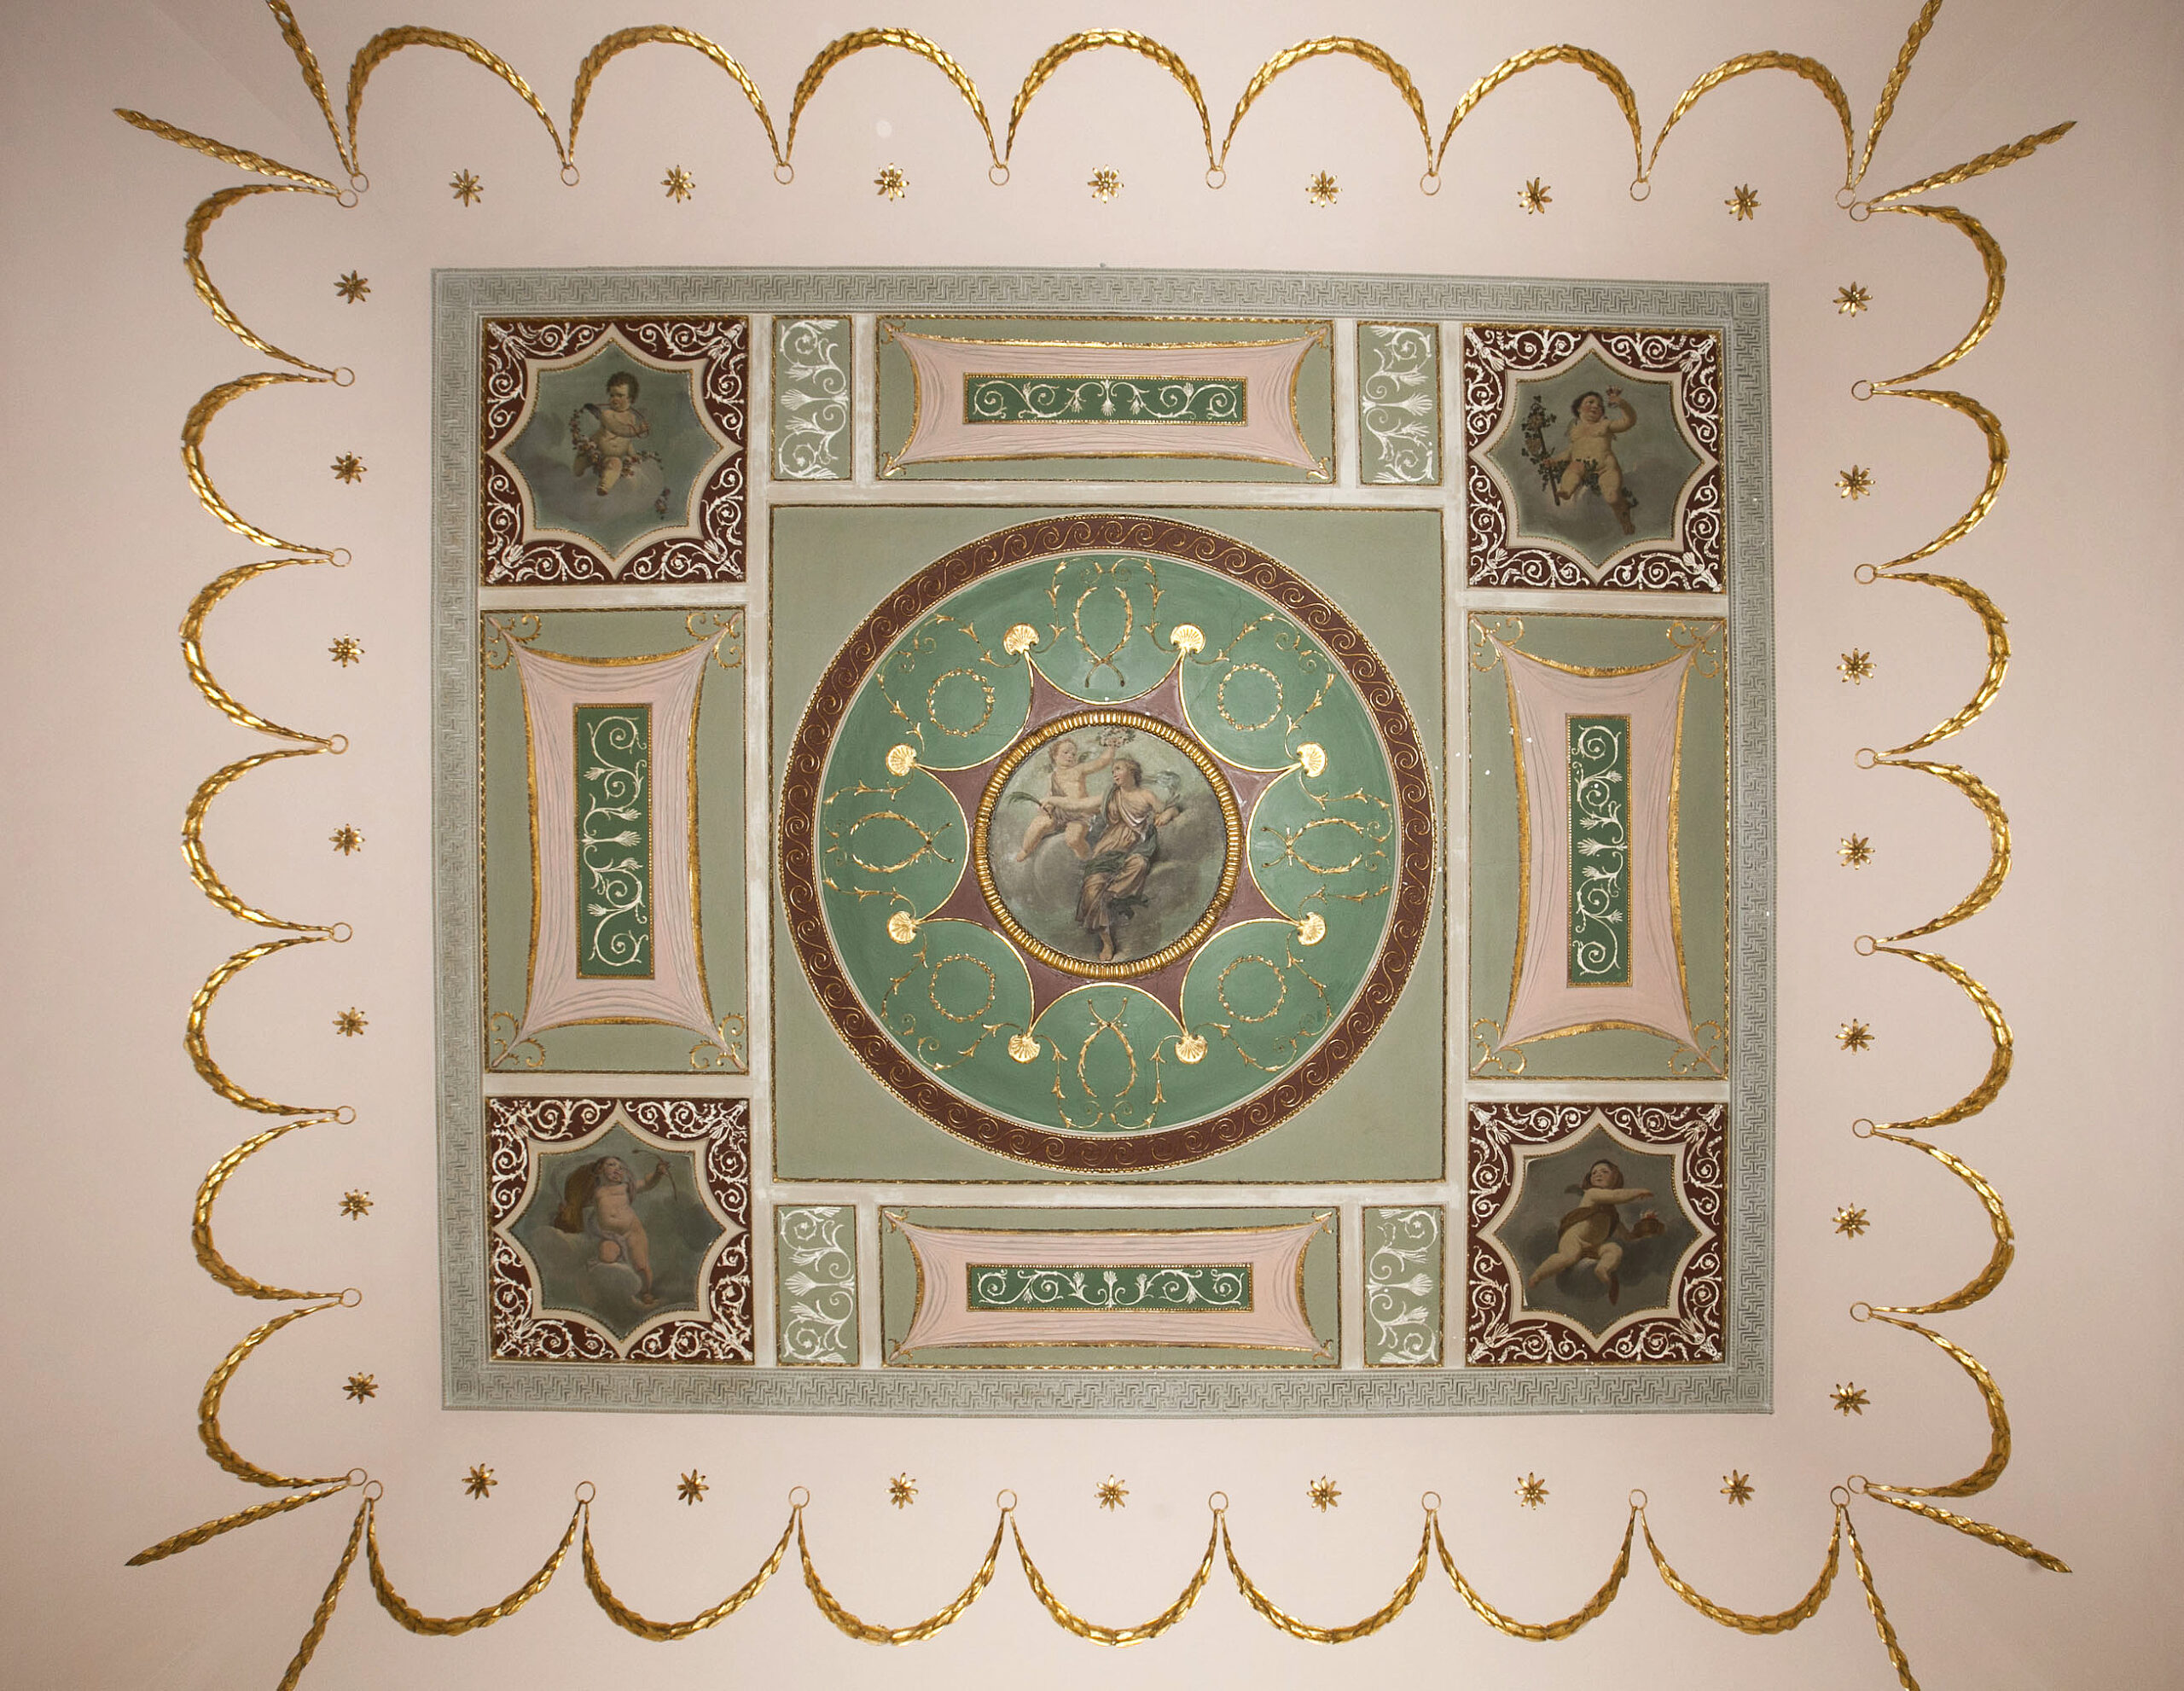 Ornate ceiling depicting generic Goddess in a circular central panel and putti at each corner depicting the four seasons.